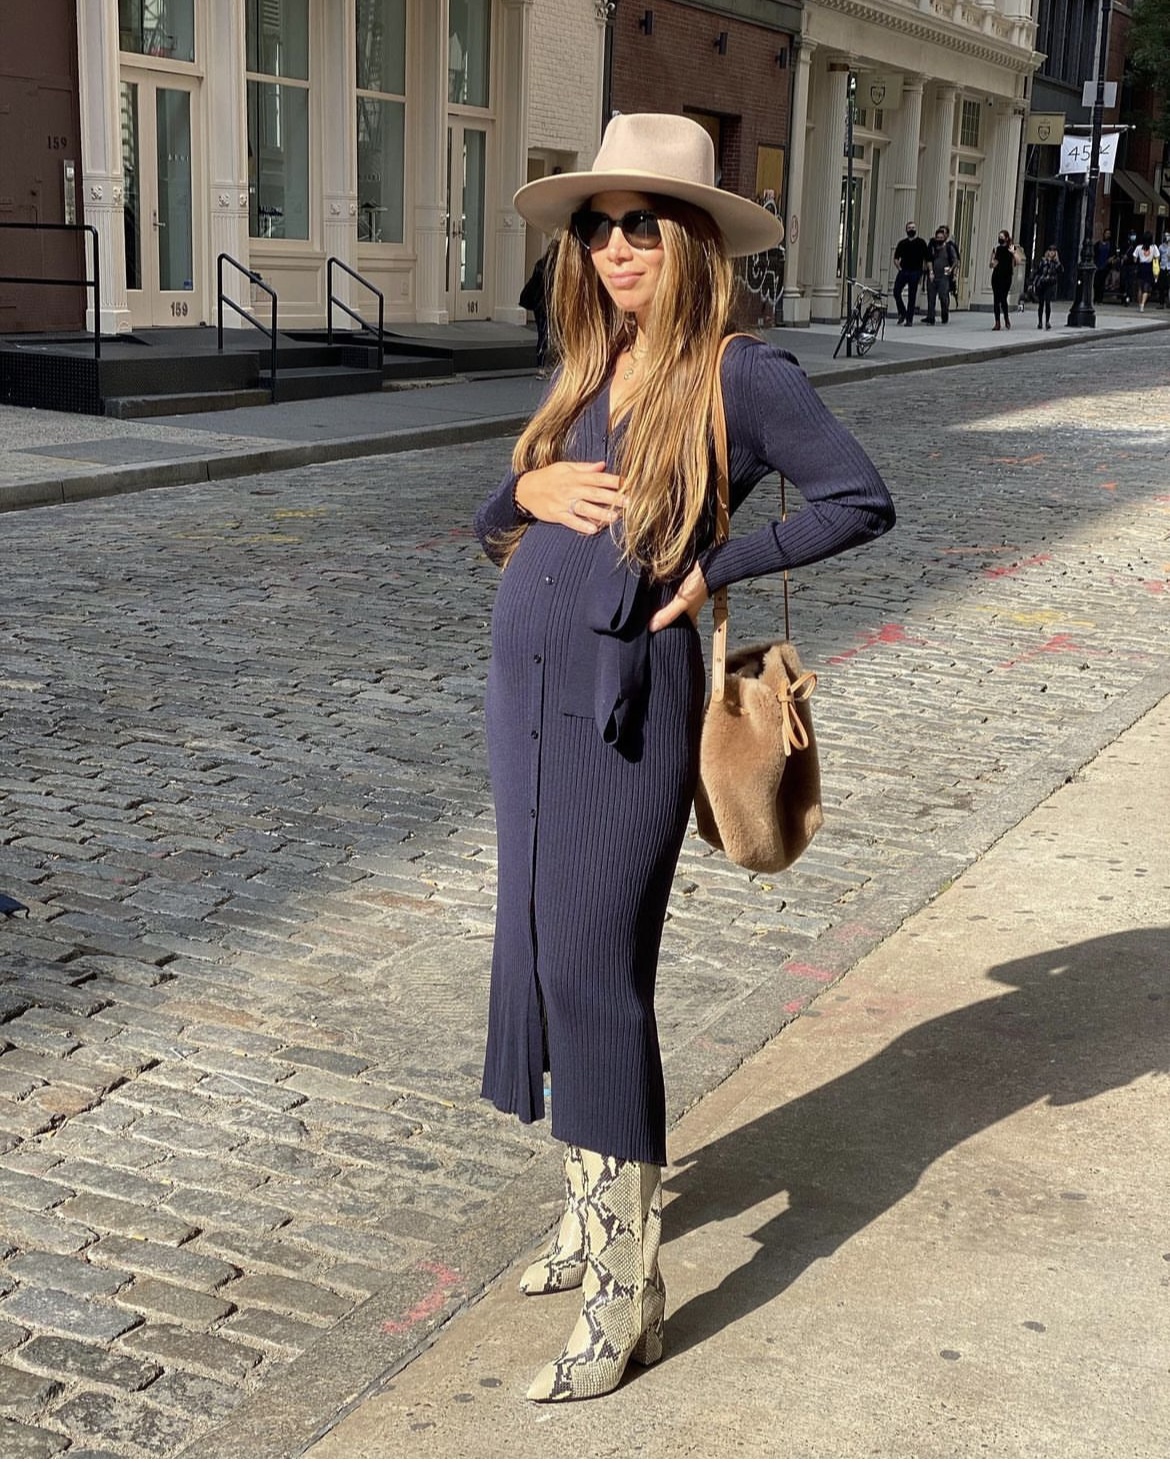 Pregnant Street Style: Maternity Outfit Ideas That Still Look Chic